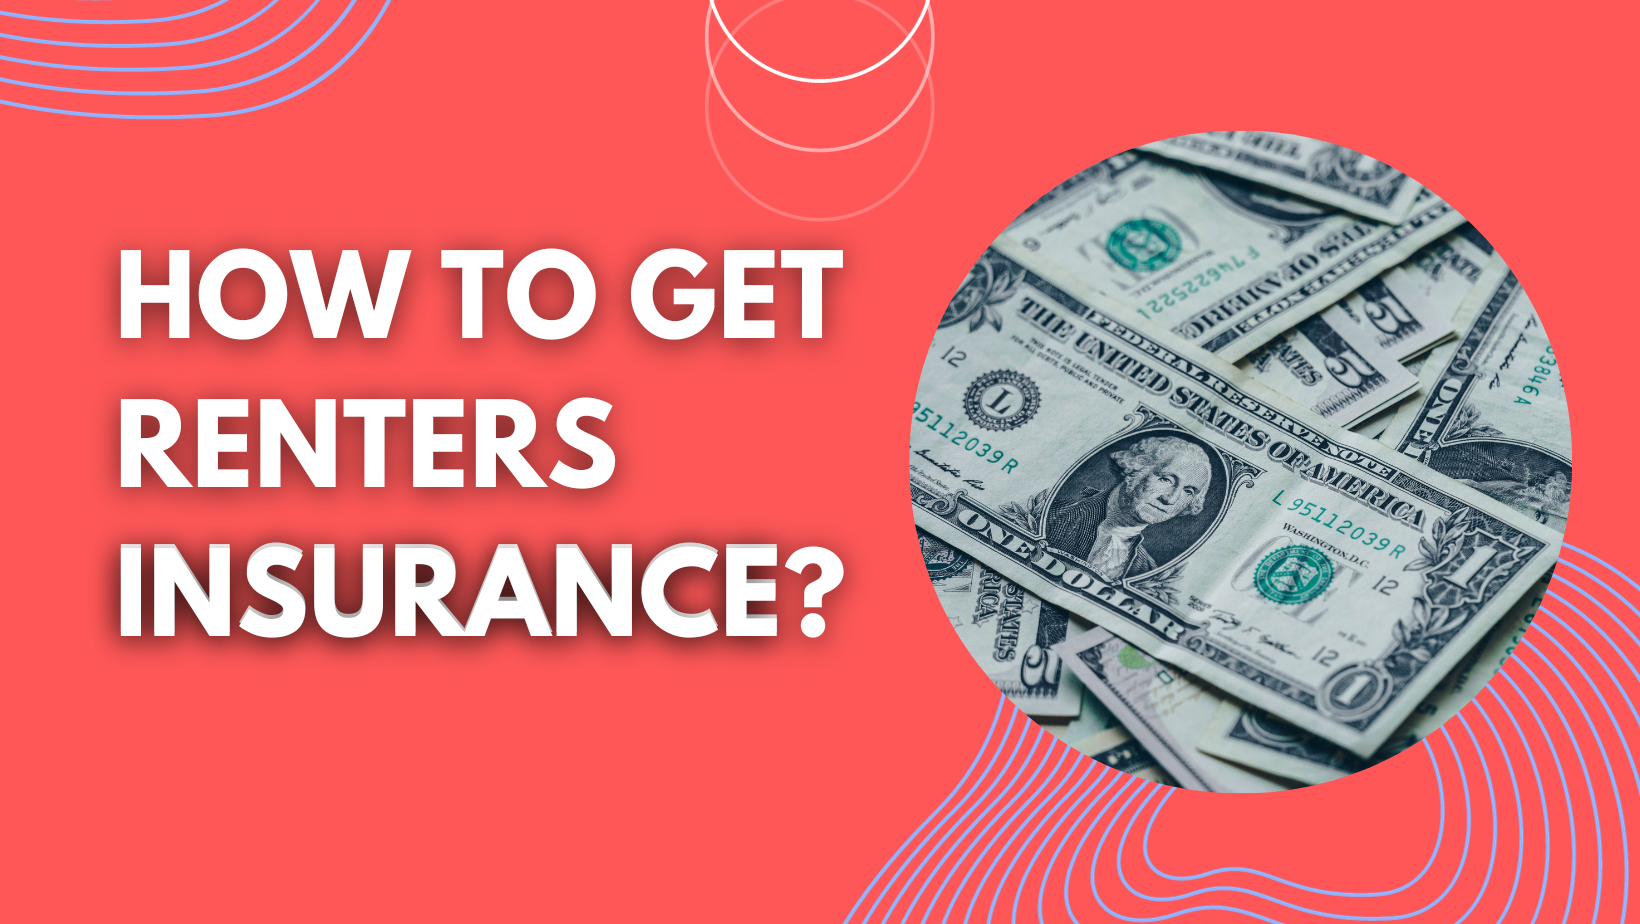 How to Get Renters Insurance?